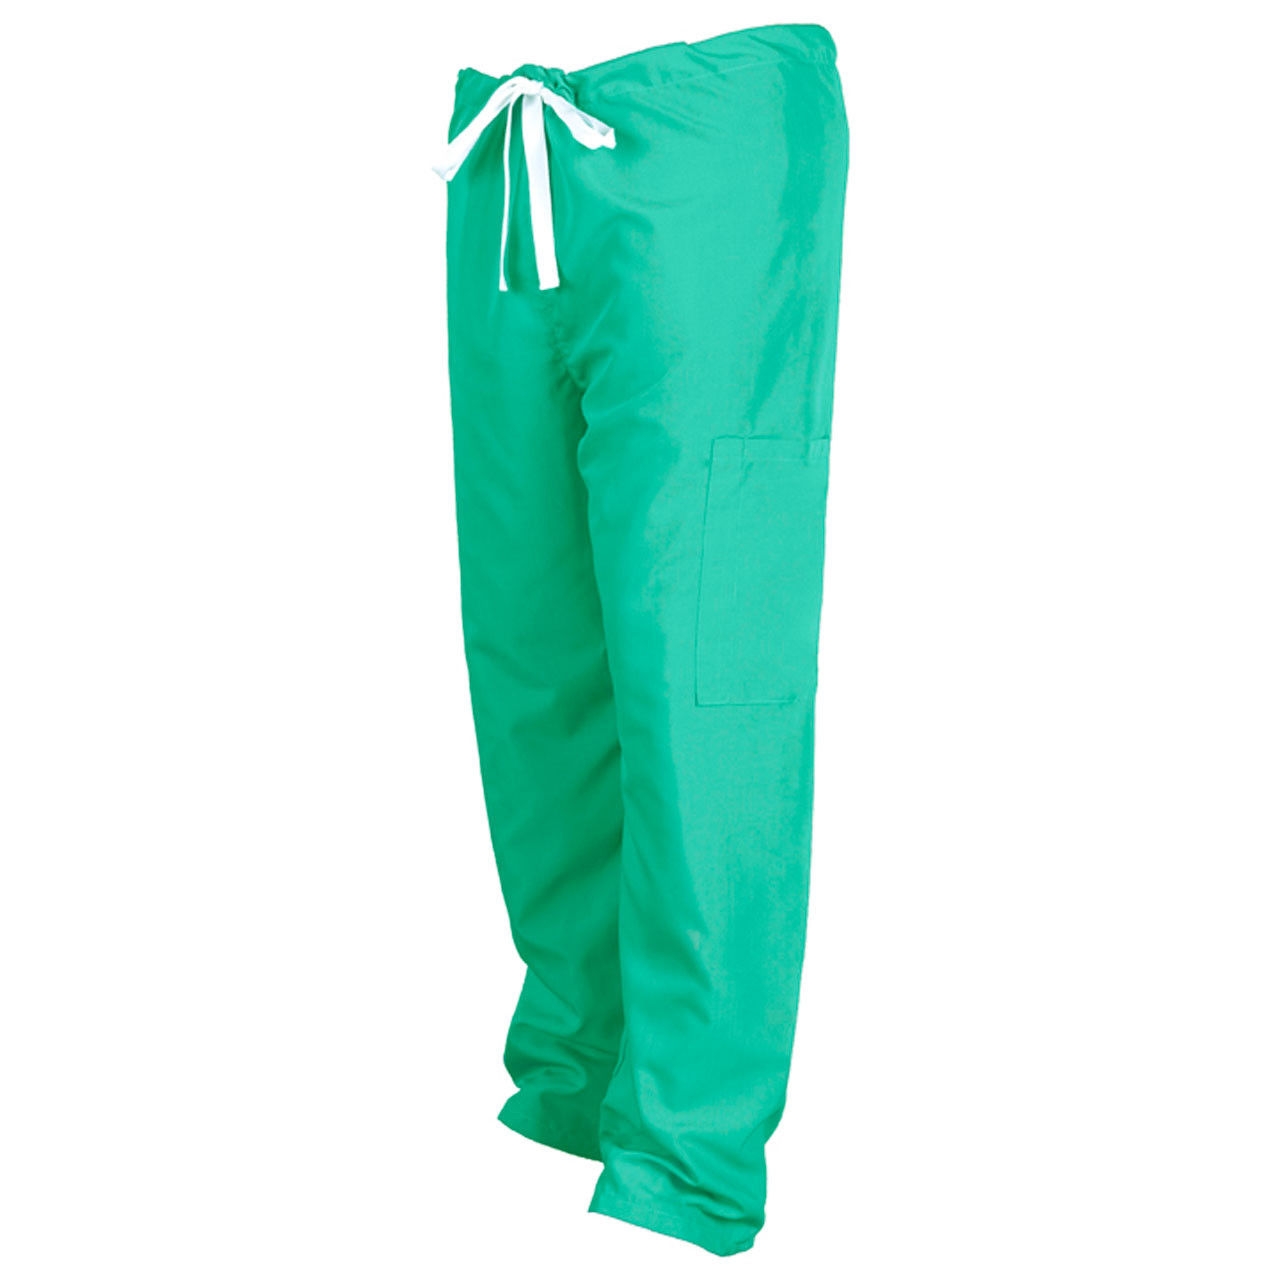 Cargo Scrub Pants, Jade Green - Case of 12 Questions & Answers